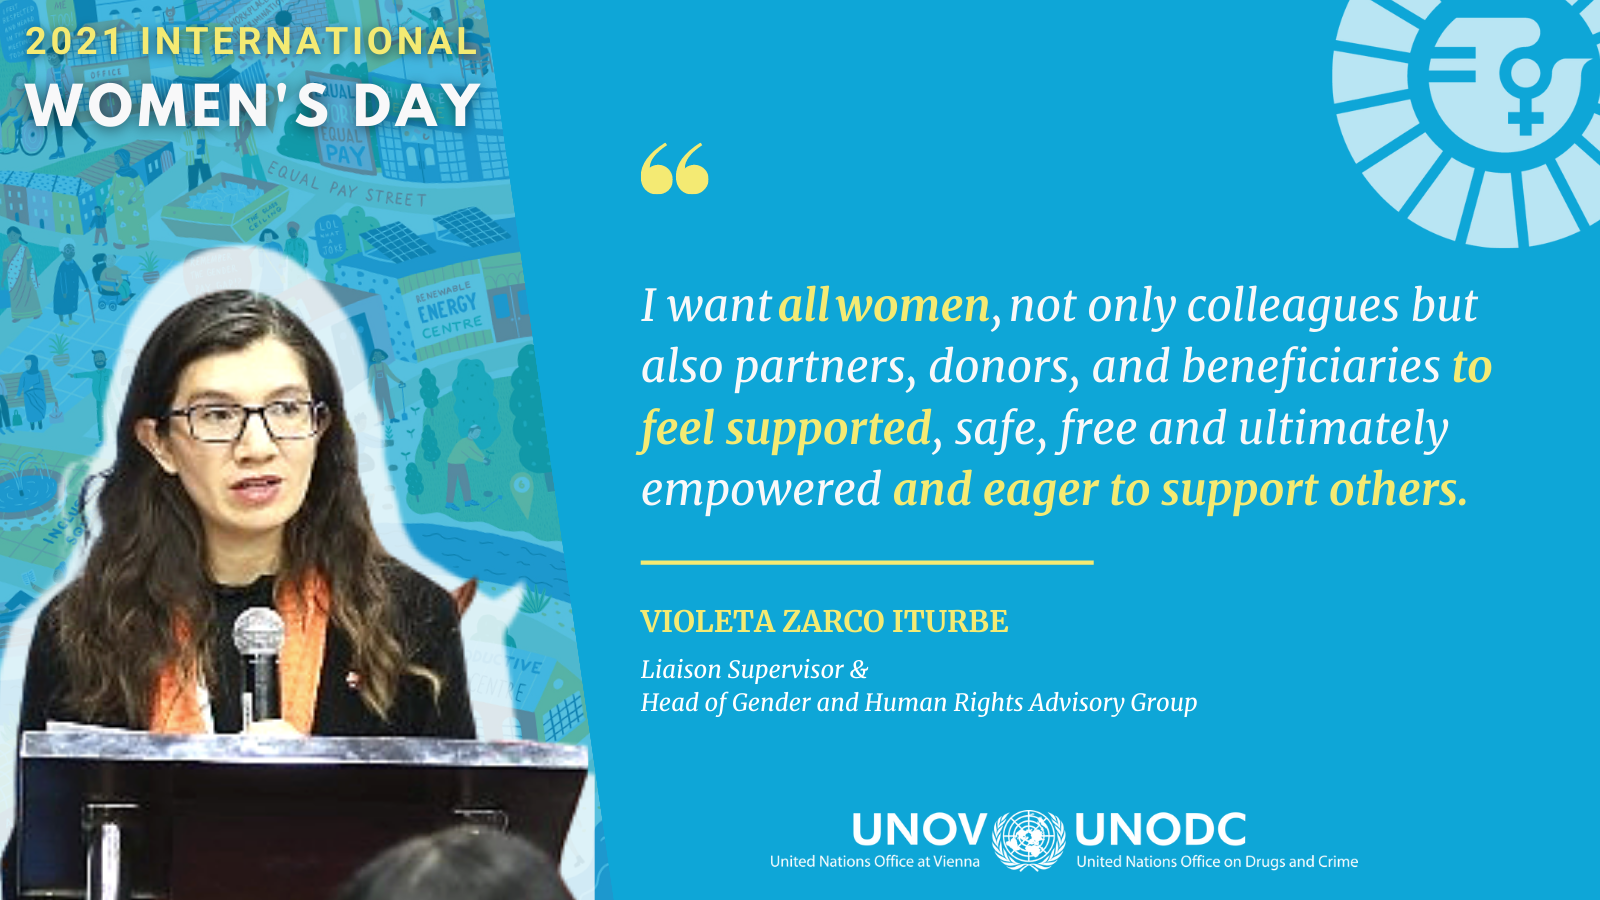 Quote of Violeta Zarco " I want all women, not only colleagues, but also partners, donors, and beneficiaries to feel supported, safe, free and ultimately empowered and eager to support others."